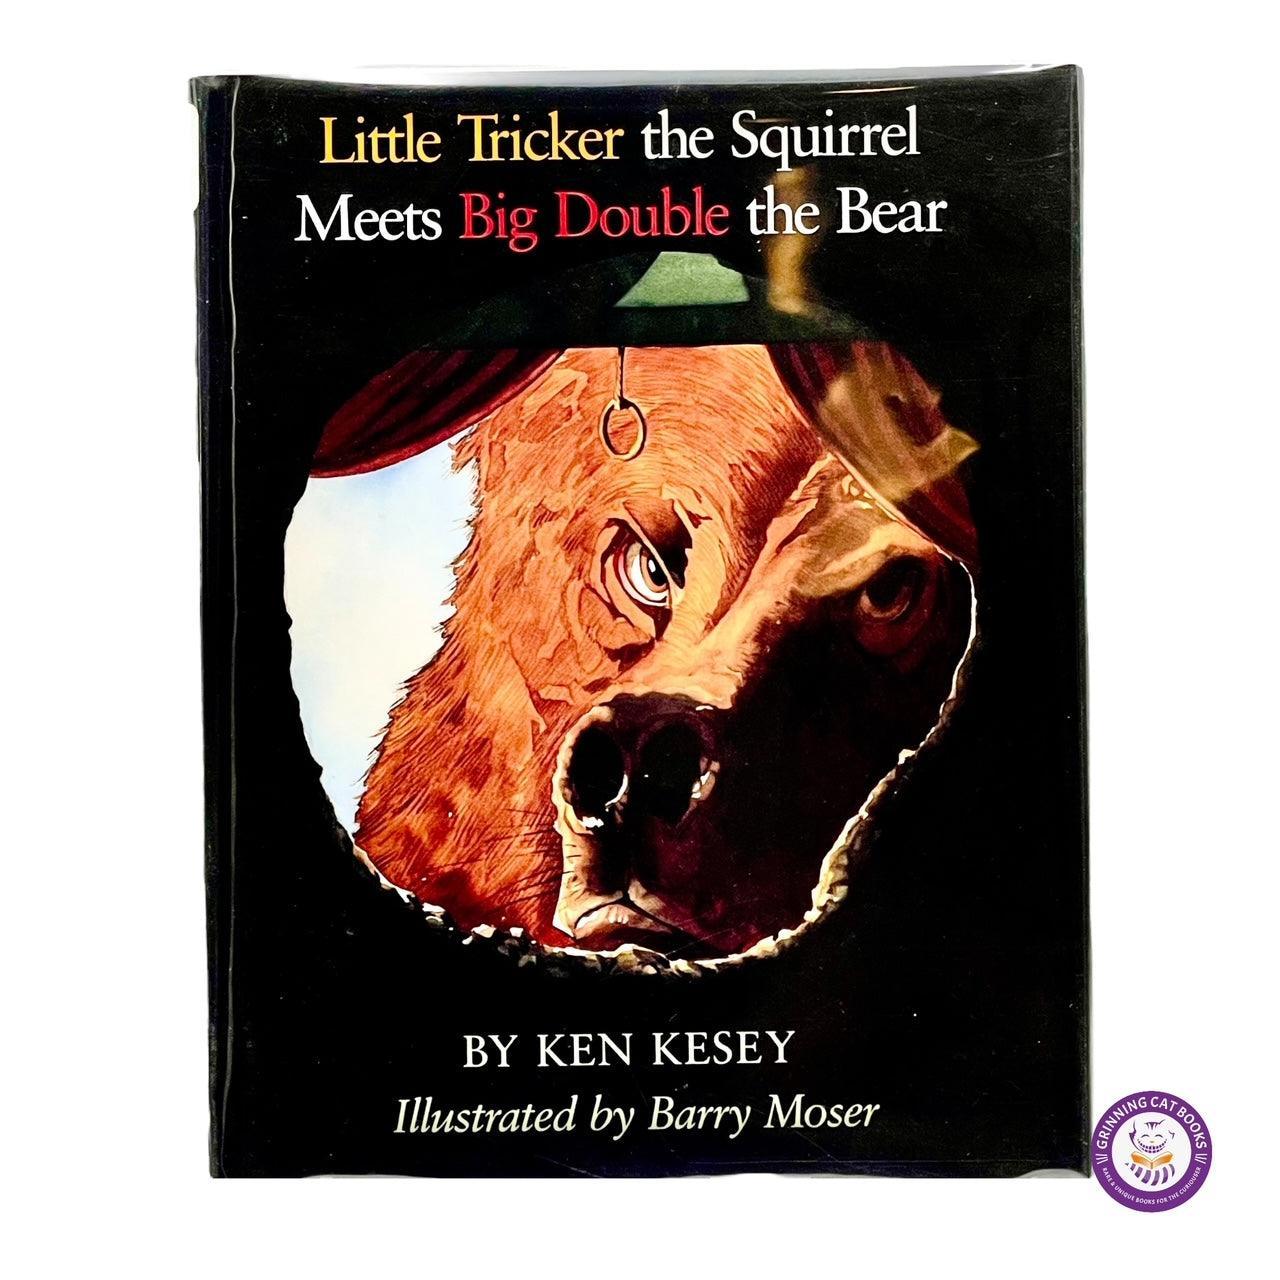 Little Tricker the Squirrel Meets Big Double the Bear (signed by Ken Kesey) - Grinning Cat Books - CHILDREN'S LITERATURE - BARRY MOSER, SIGNED